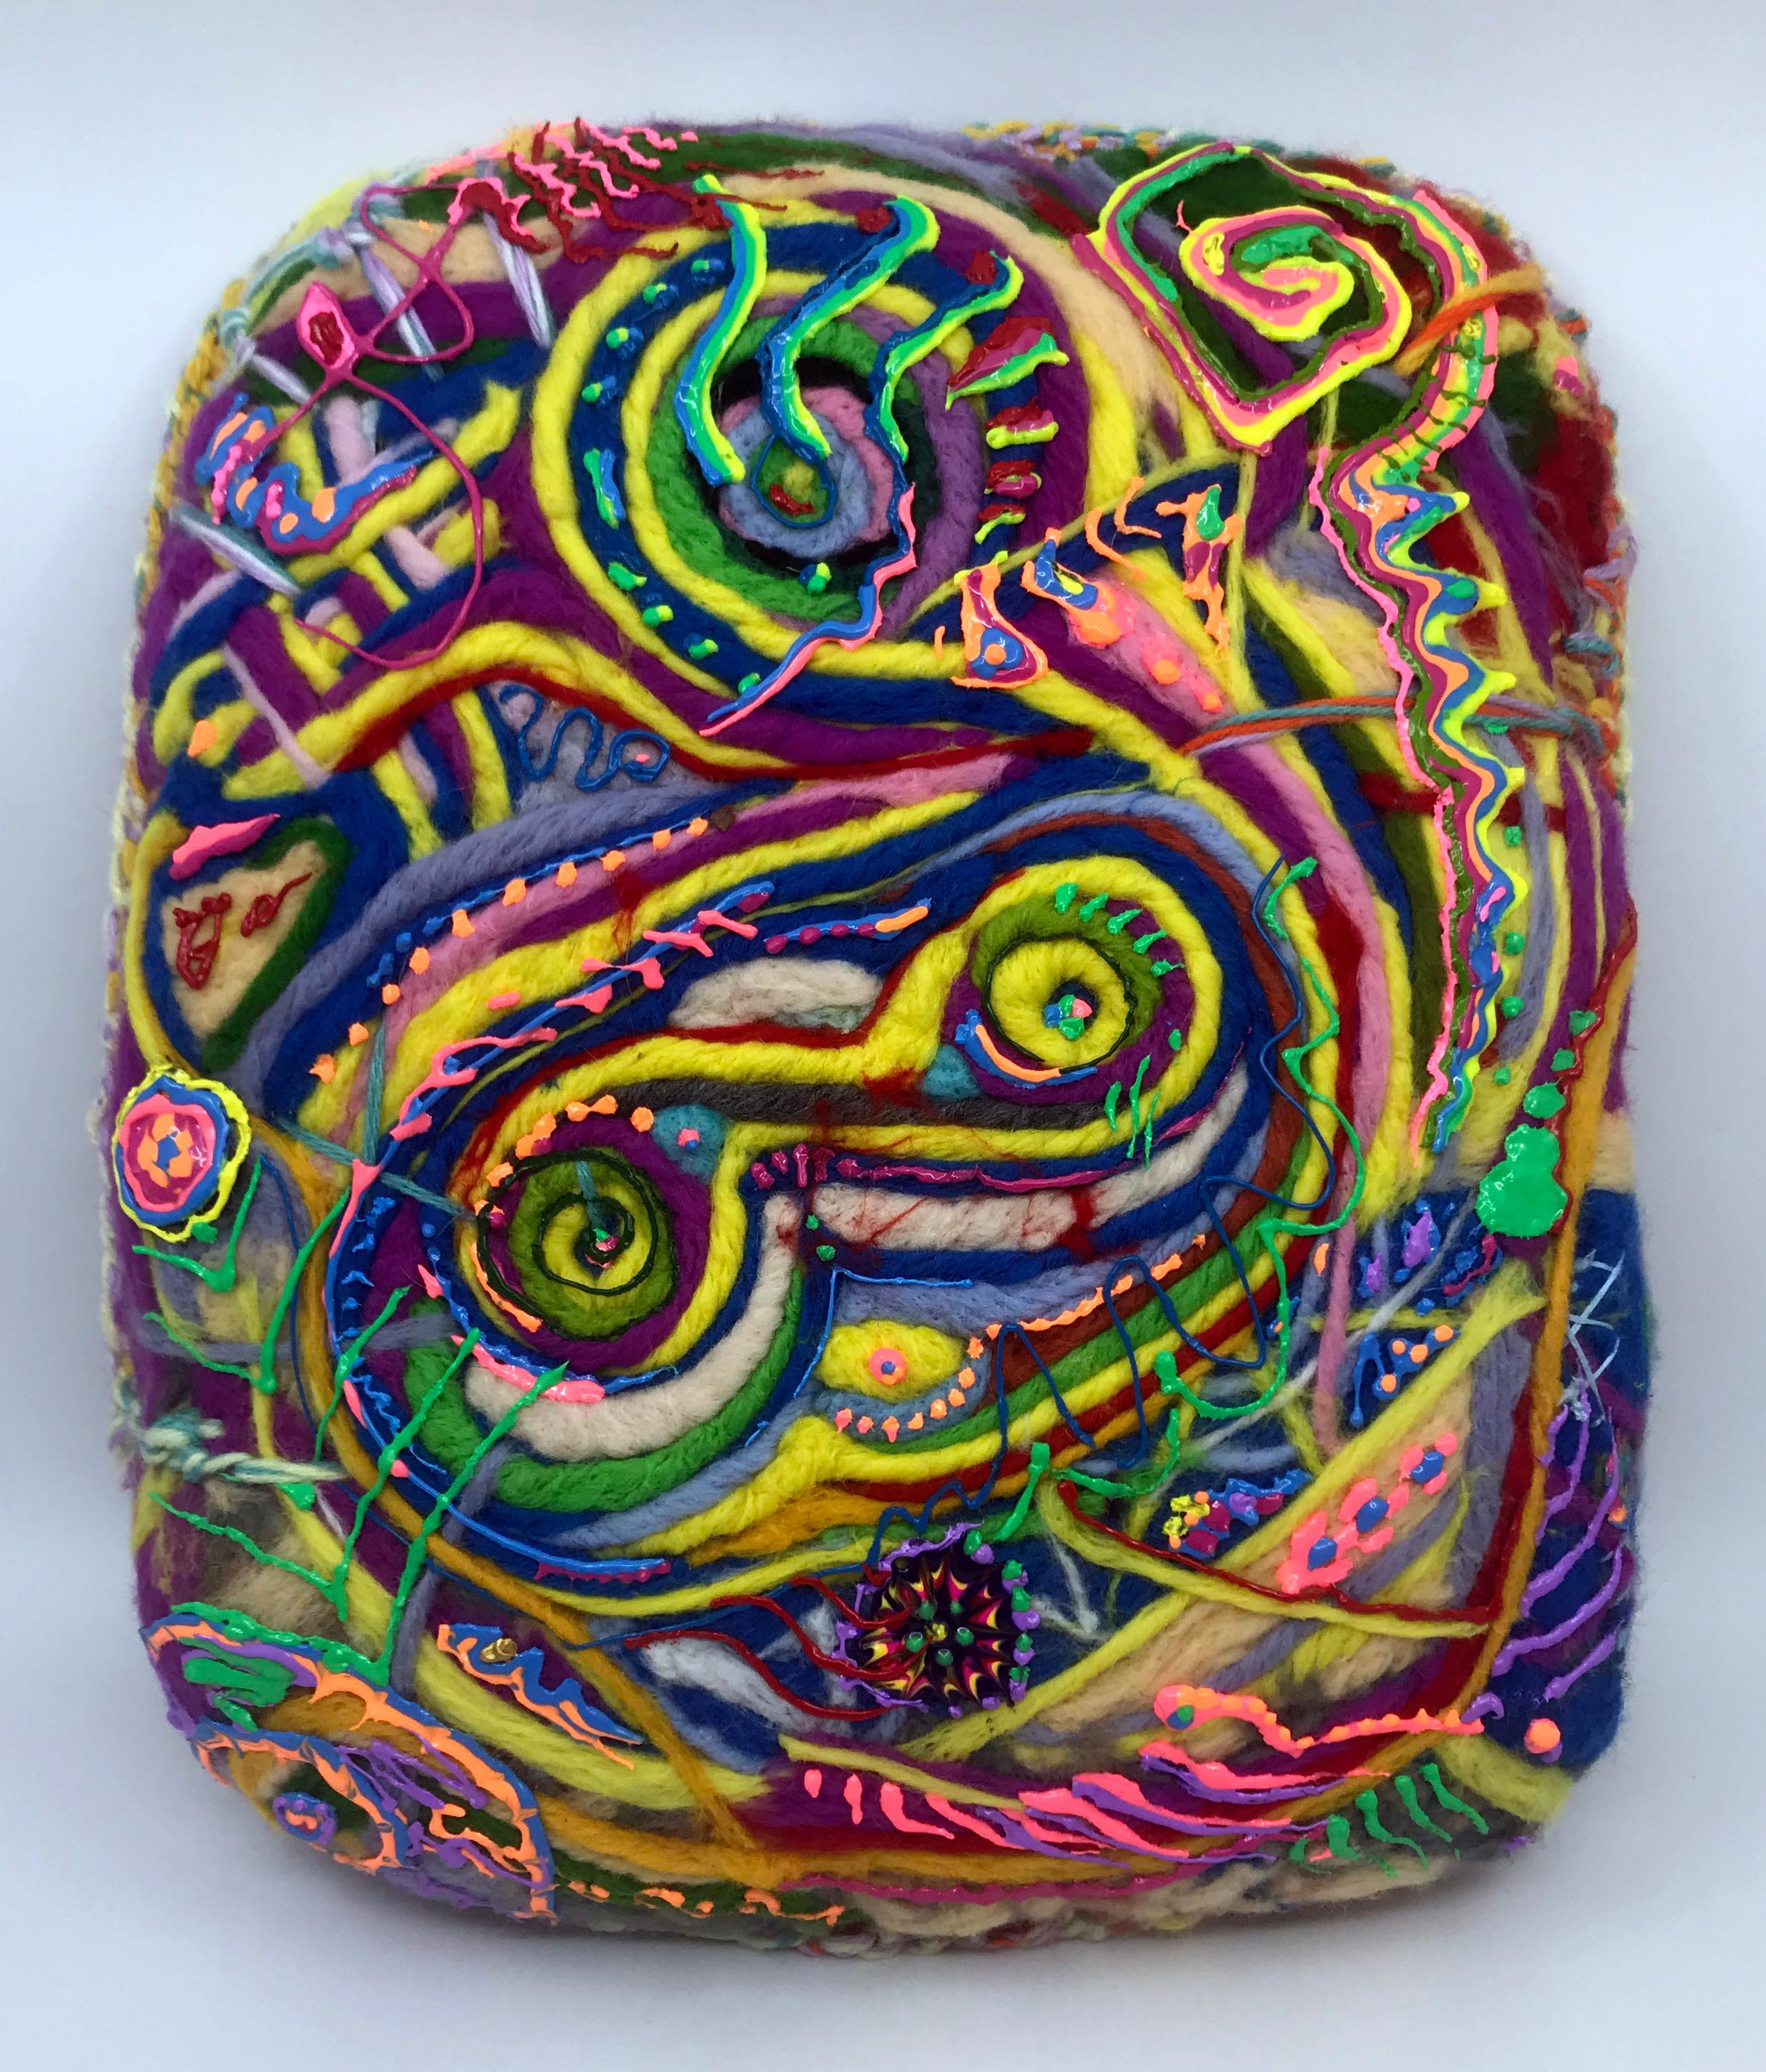 Ethan Meyer Abstract Sculpture - "A Tome of Whimsical Lore", Contemporary, Fiber, Mixed Media, Wall Hanging